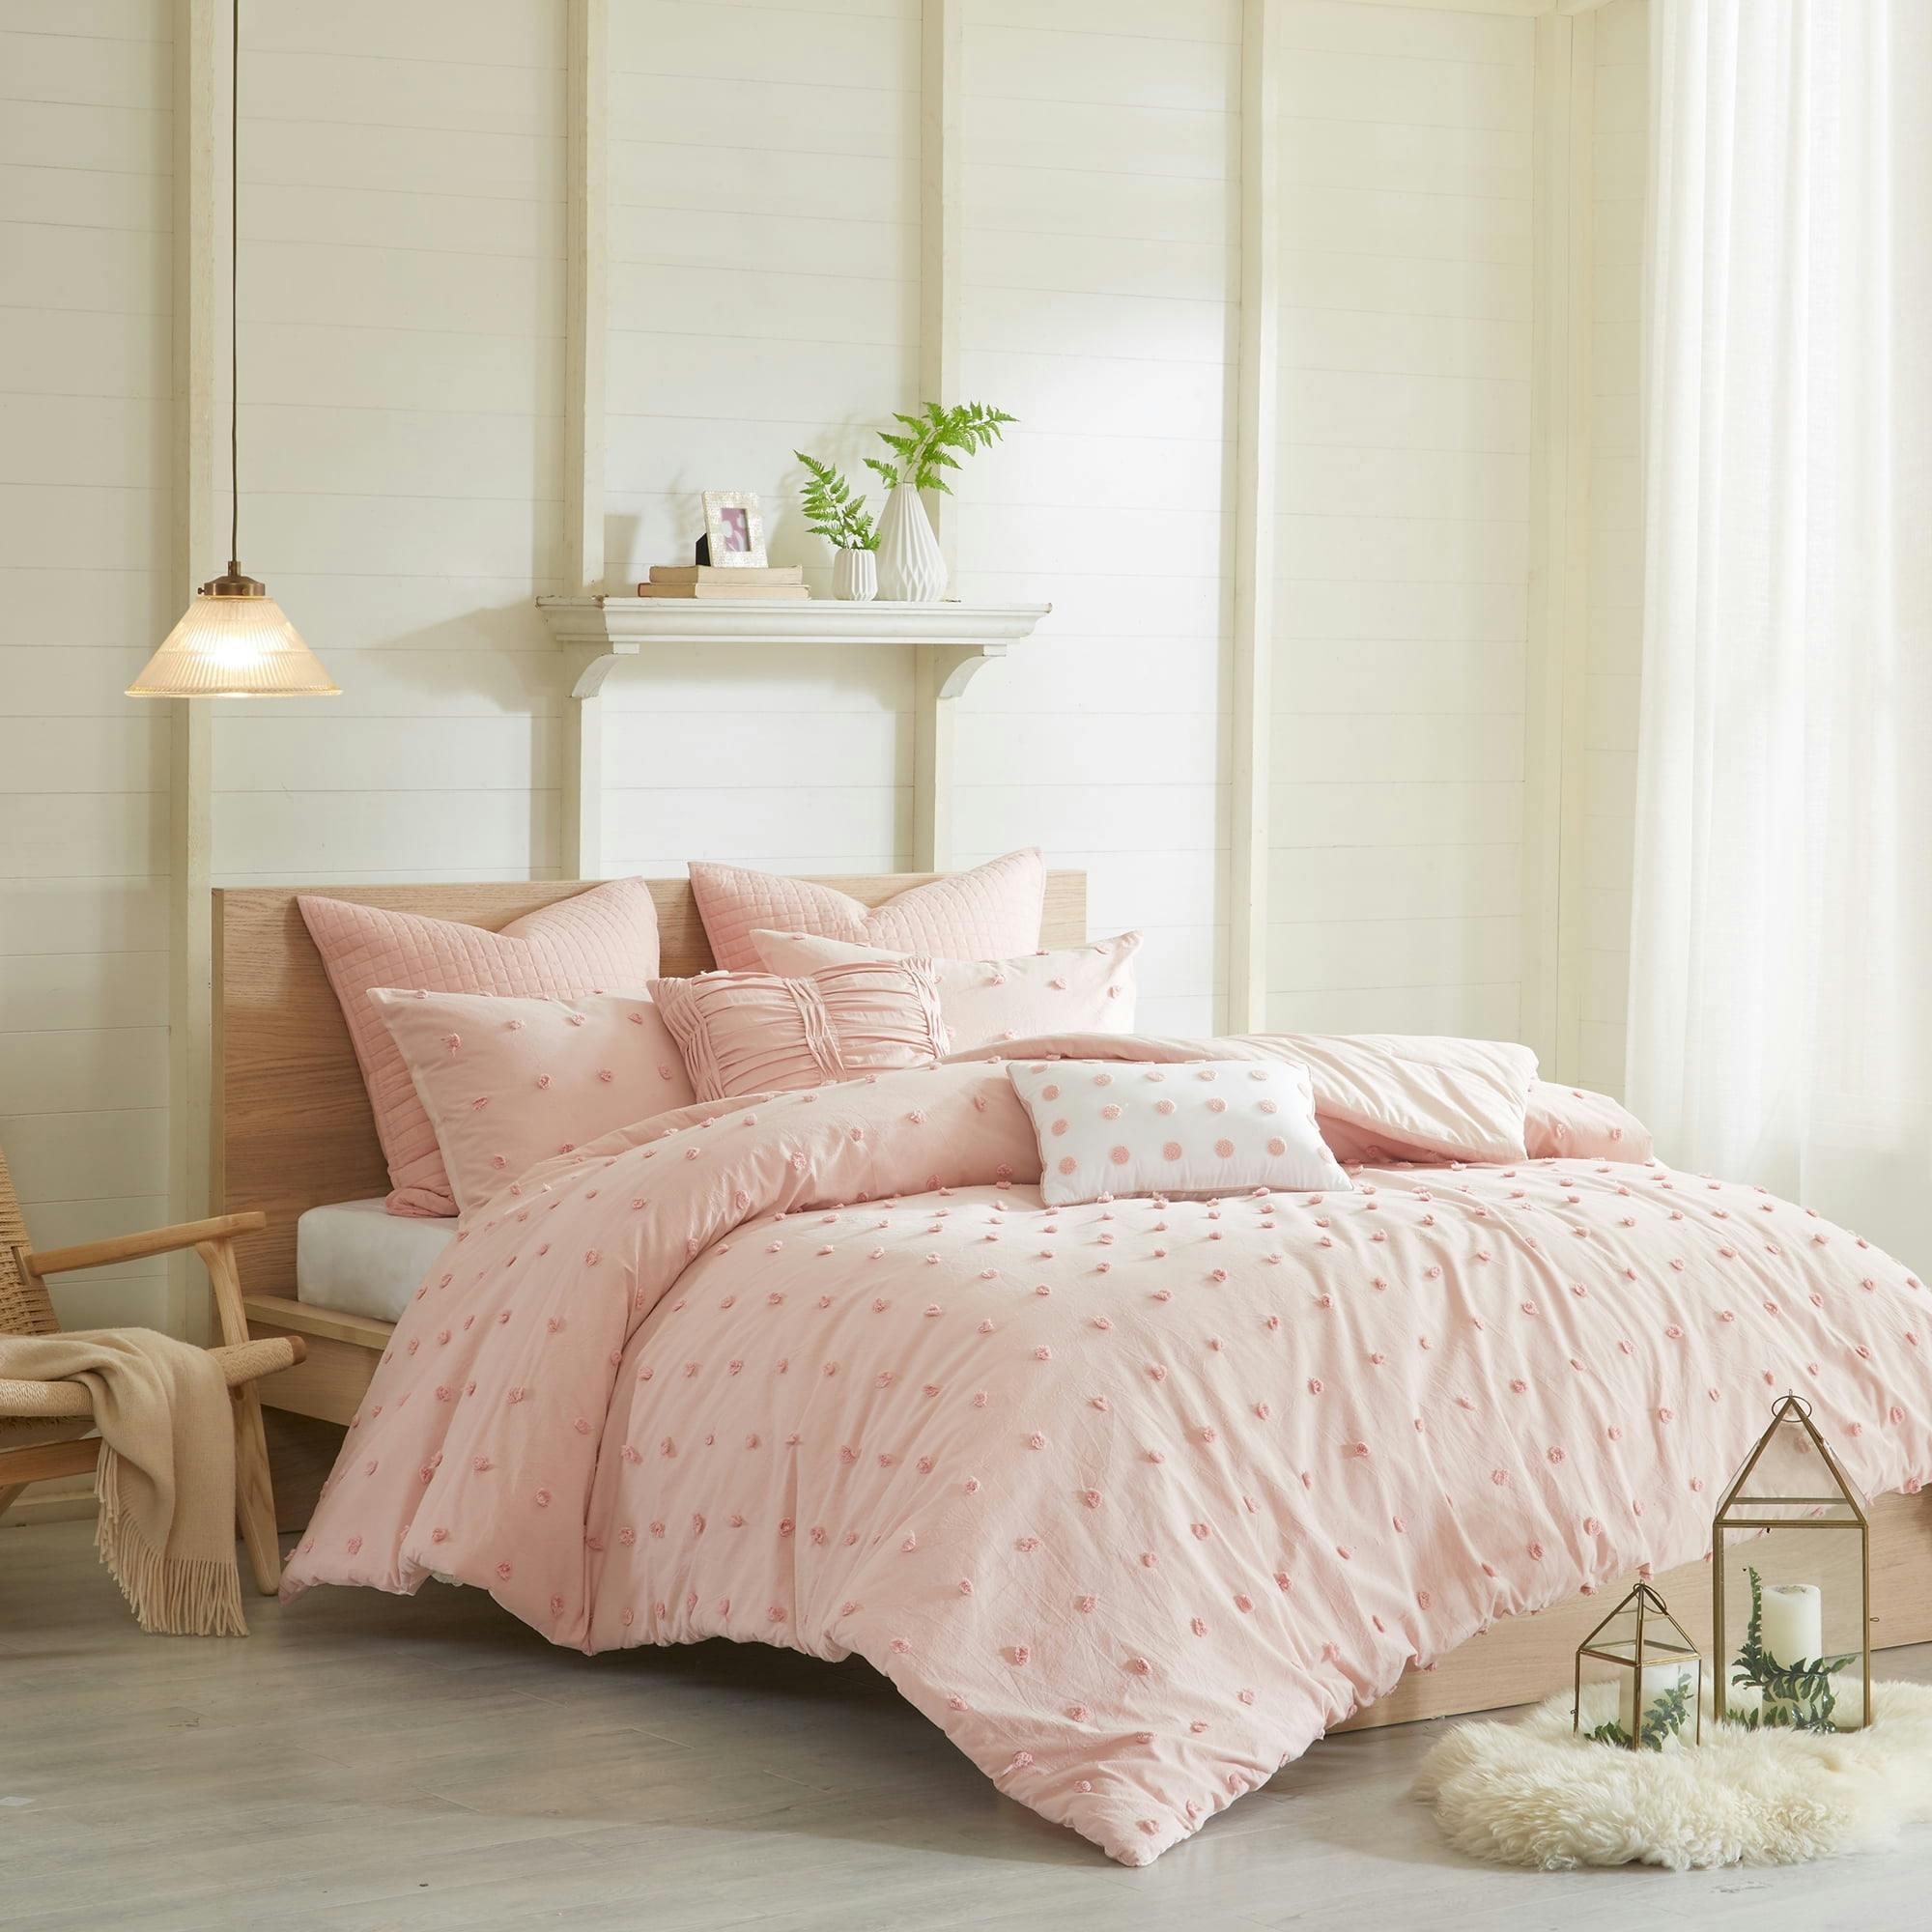 Charming Pink Cotton King Comforter Set with Tufted Accents